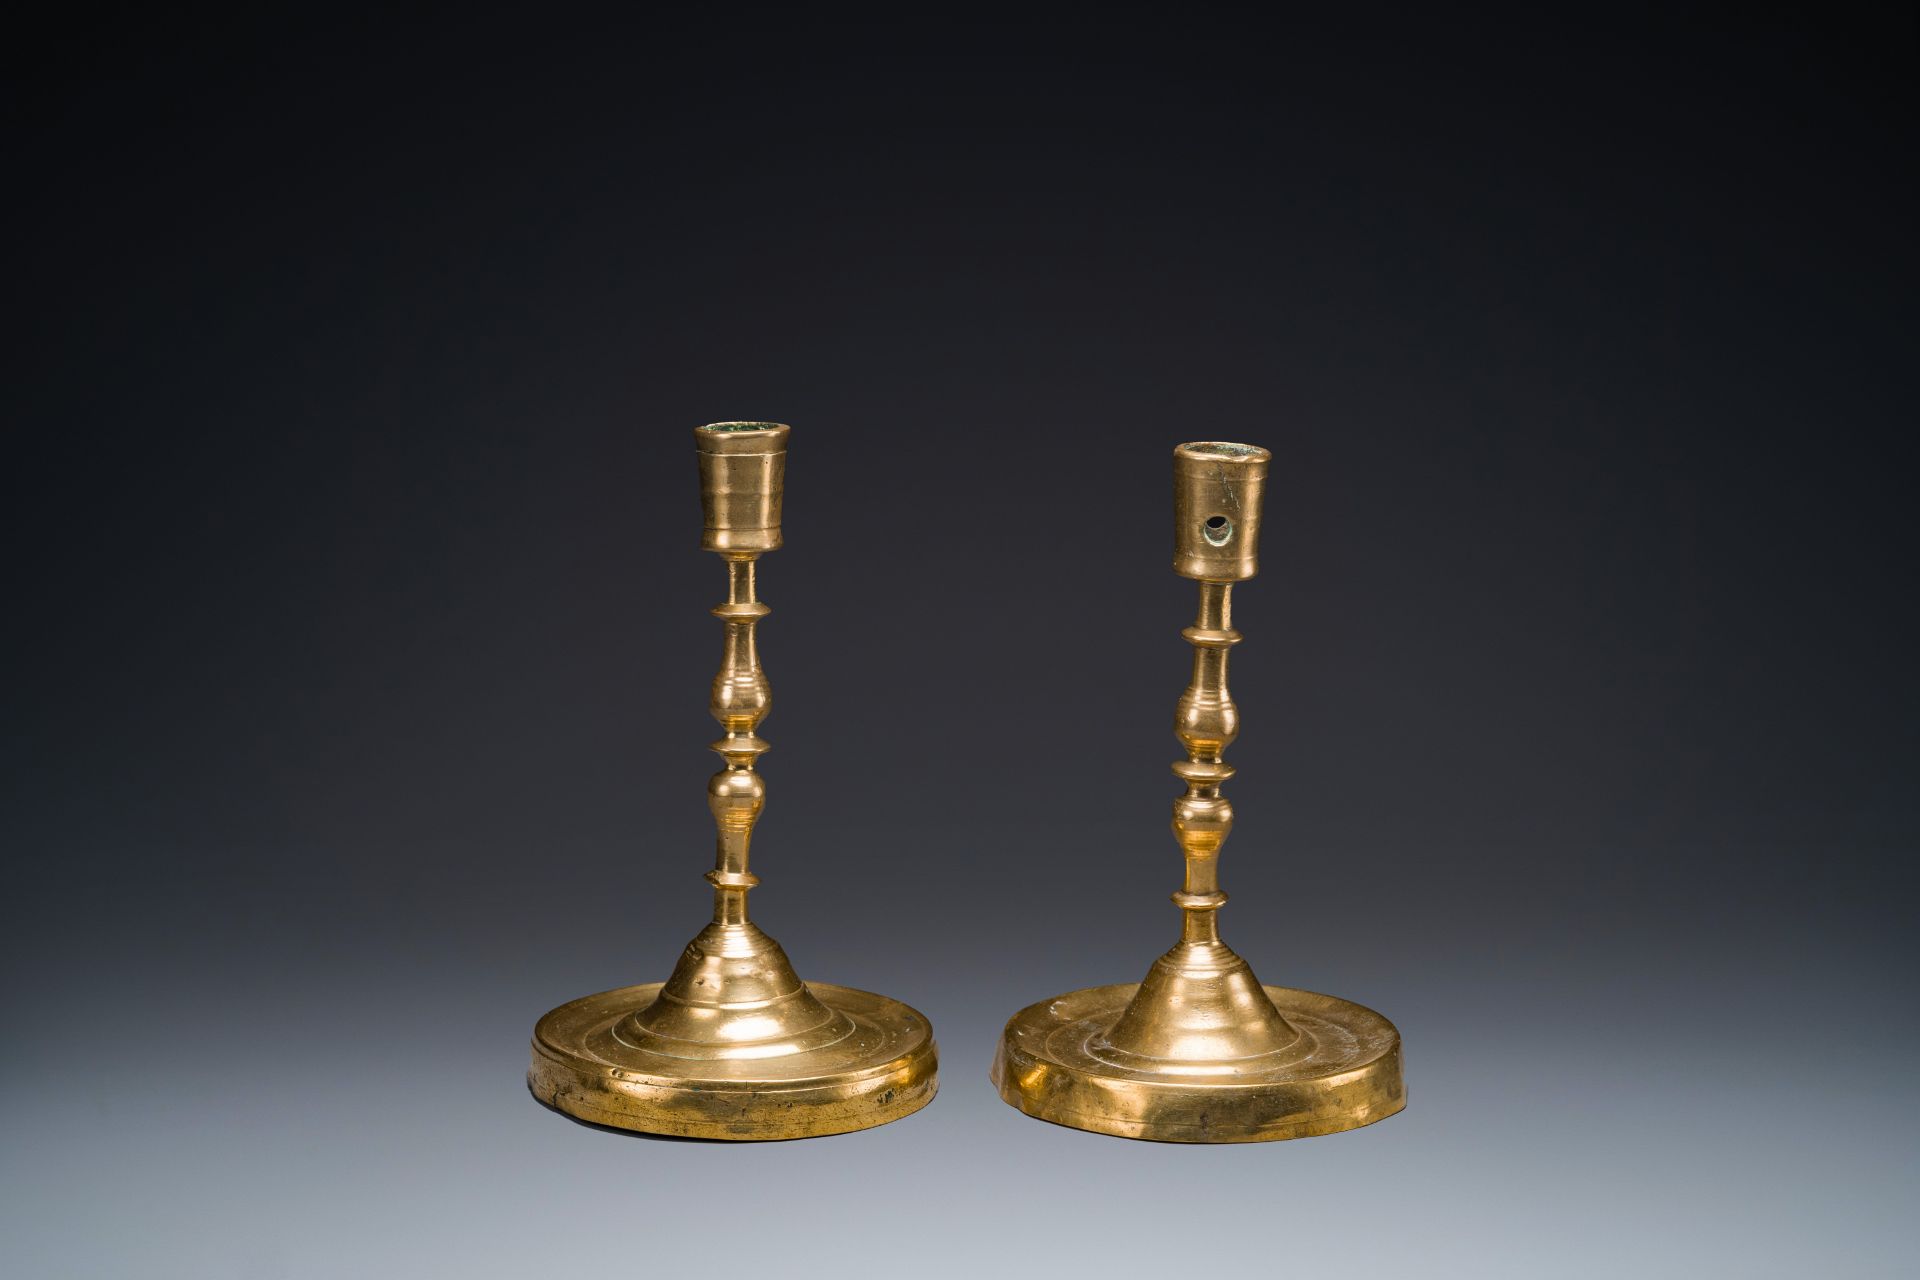 A pair of Flemish or Dutch knotted bronze candlesticks, 16th C. - Image 2 of 8